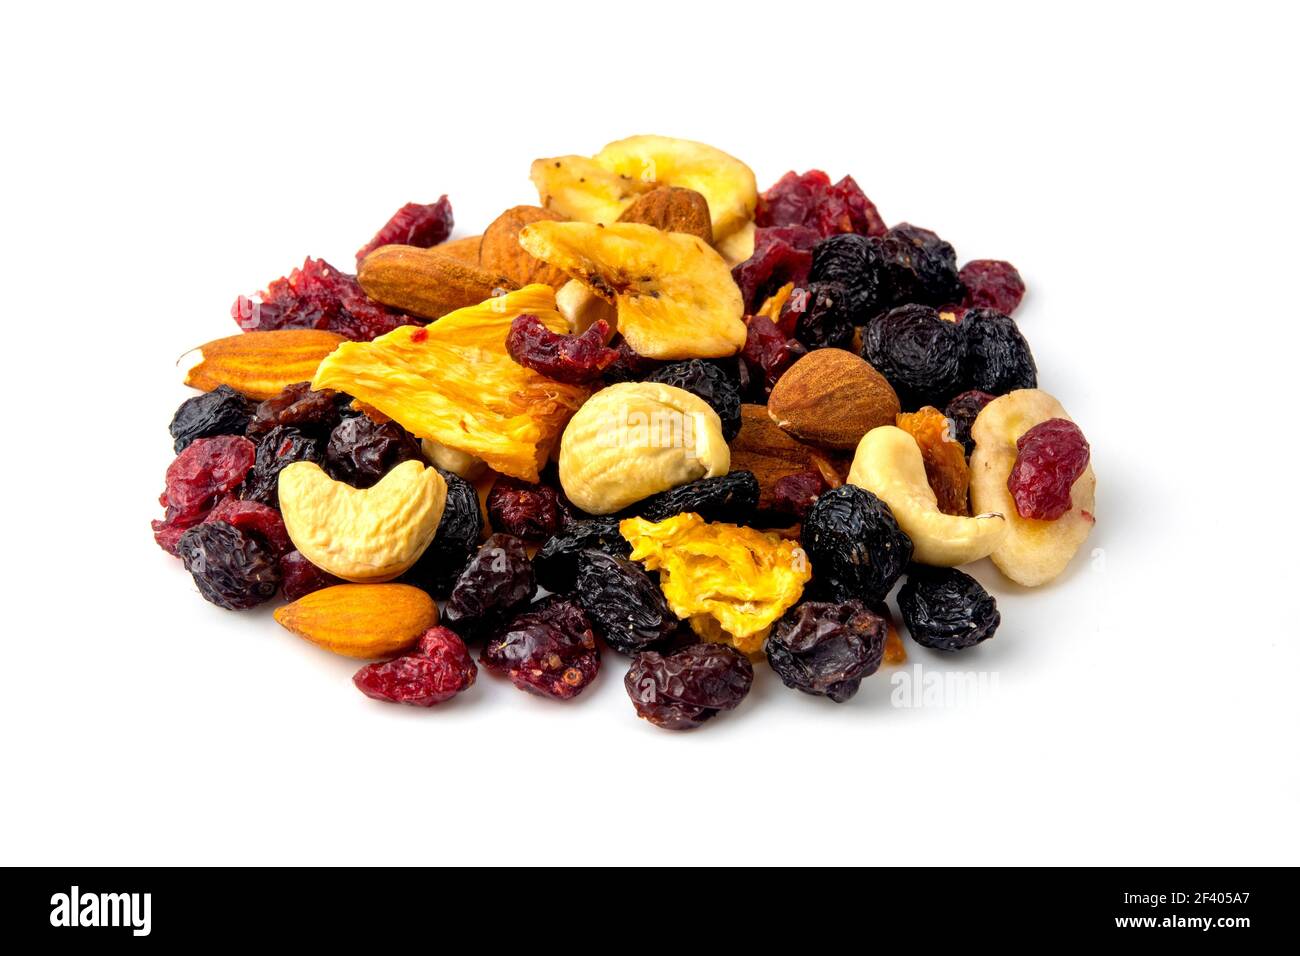 Trail mix with dried fruits, nuts and raisins on a white background Stock Photo